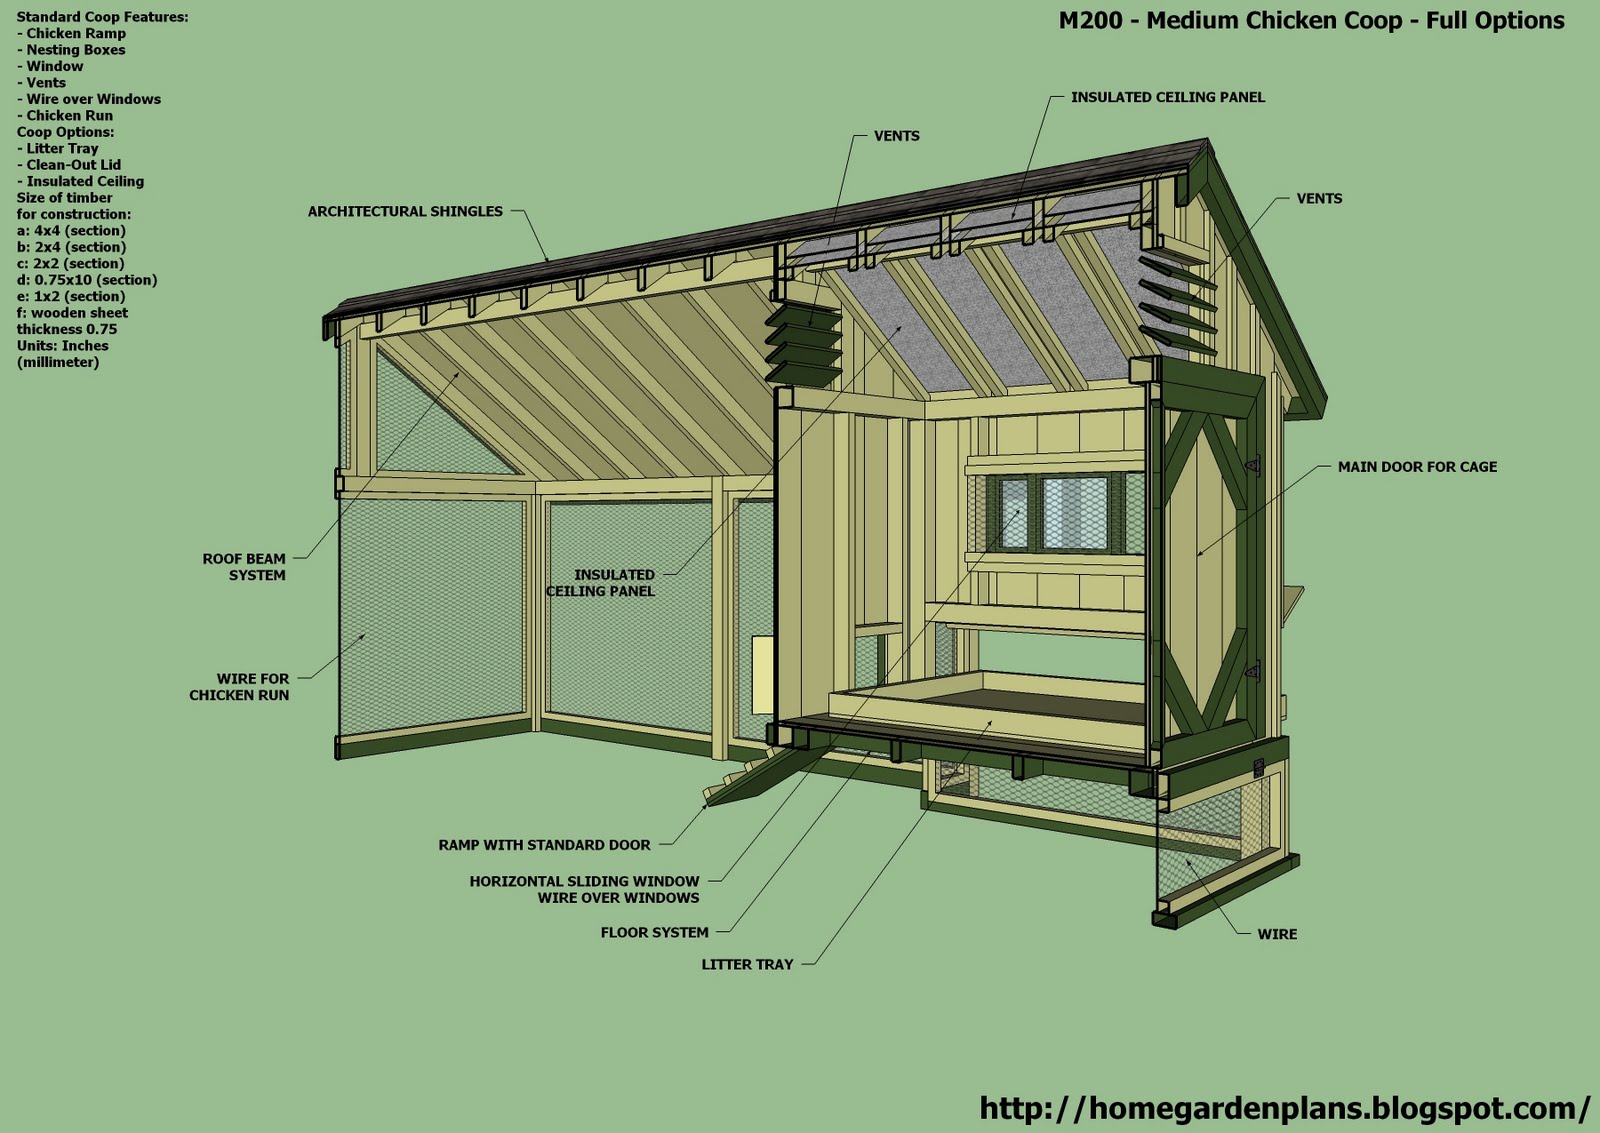 ... Chicken Coop Plans Construction - Chicken Coop Design - How To Build A